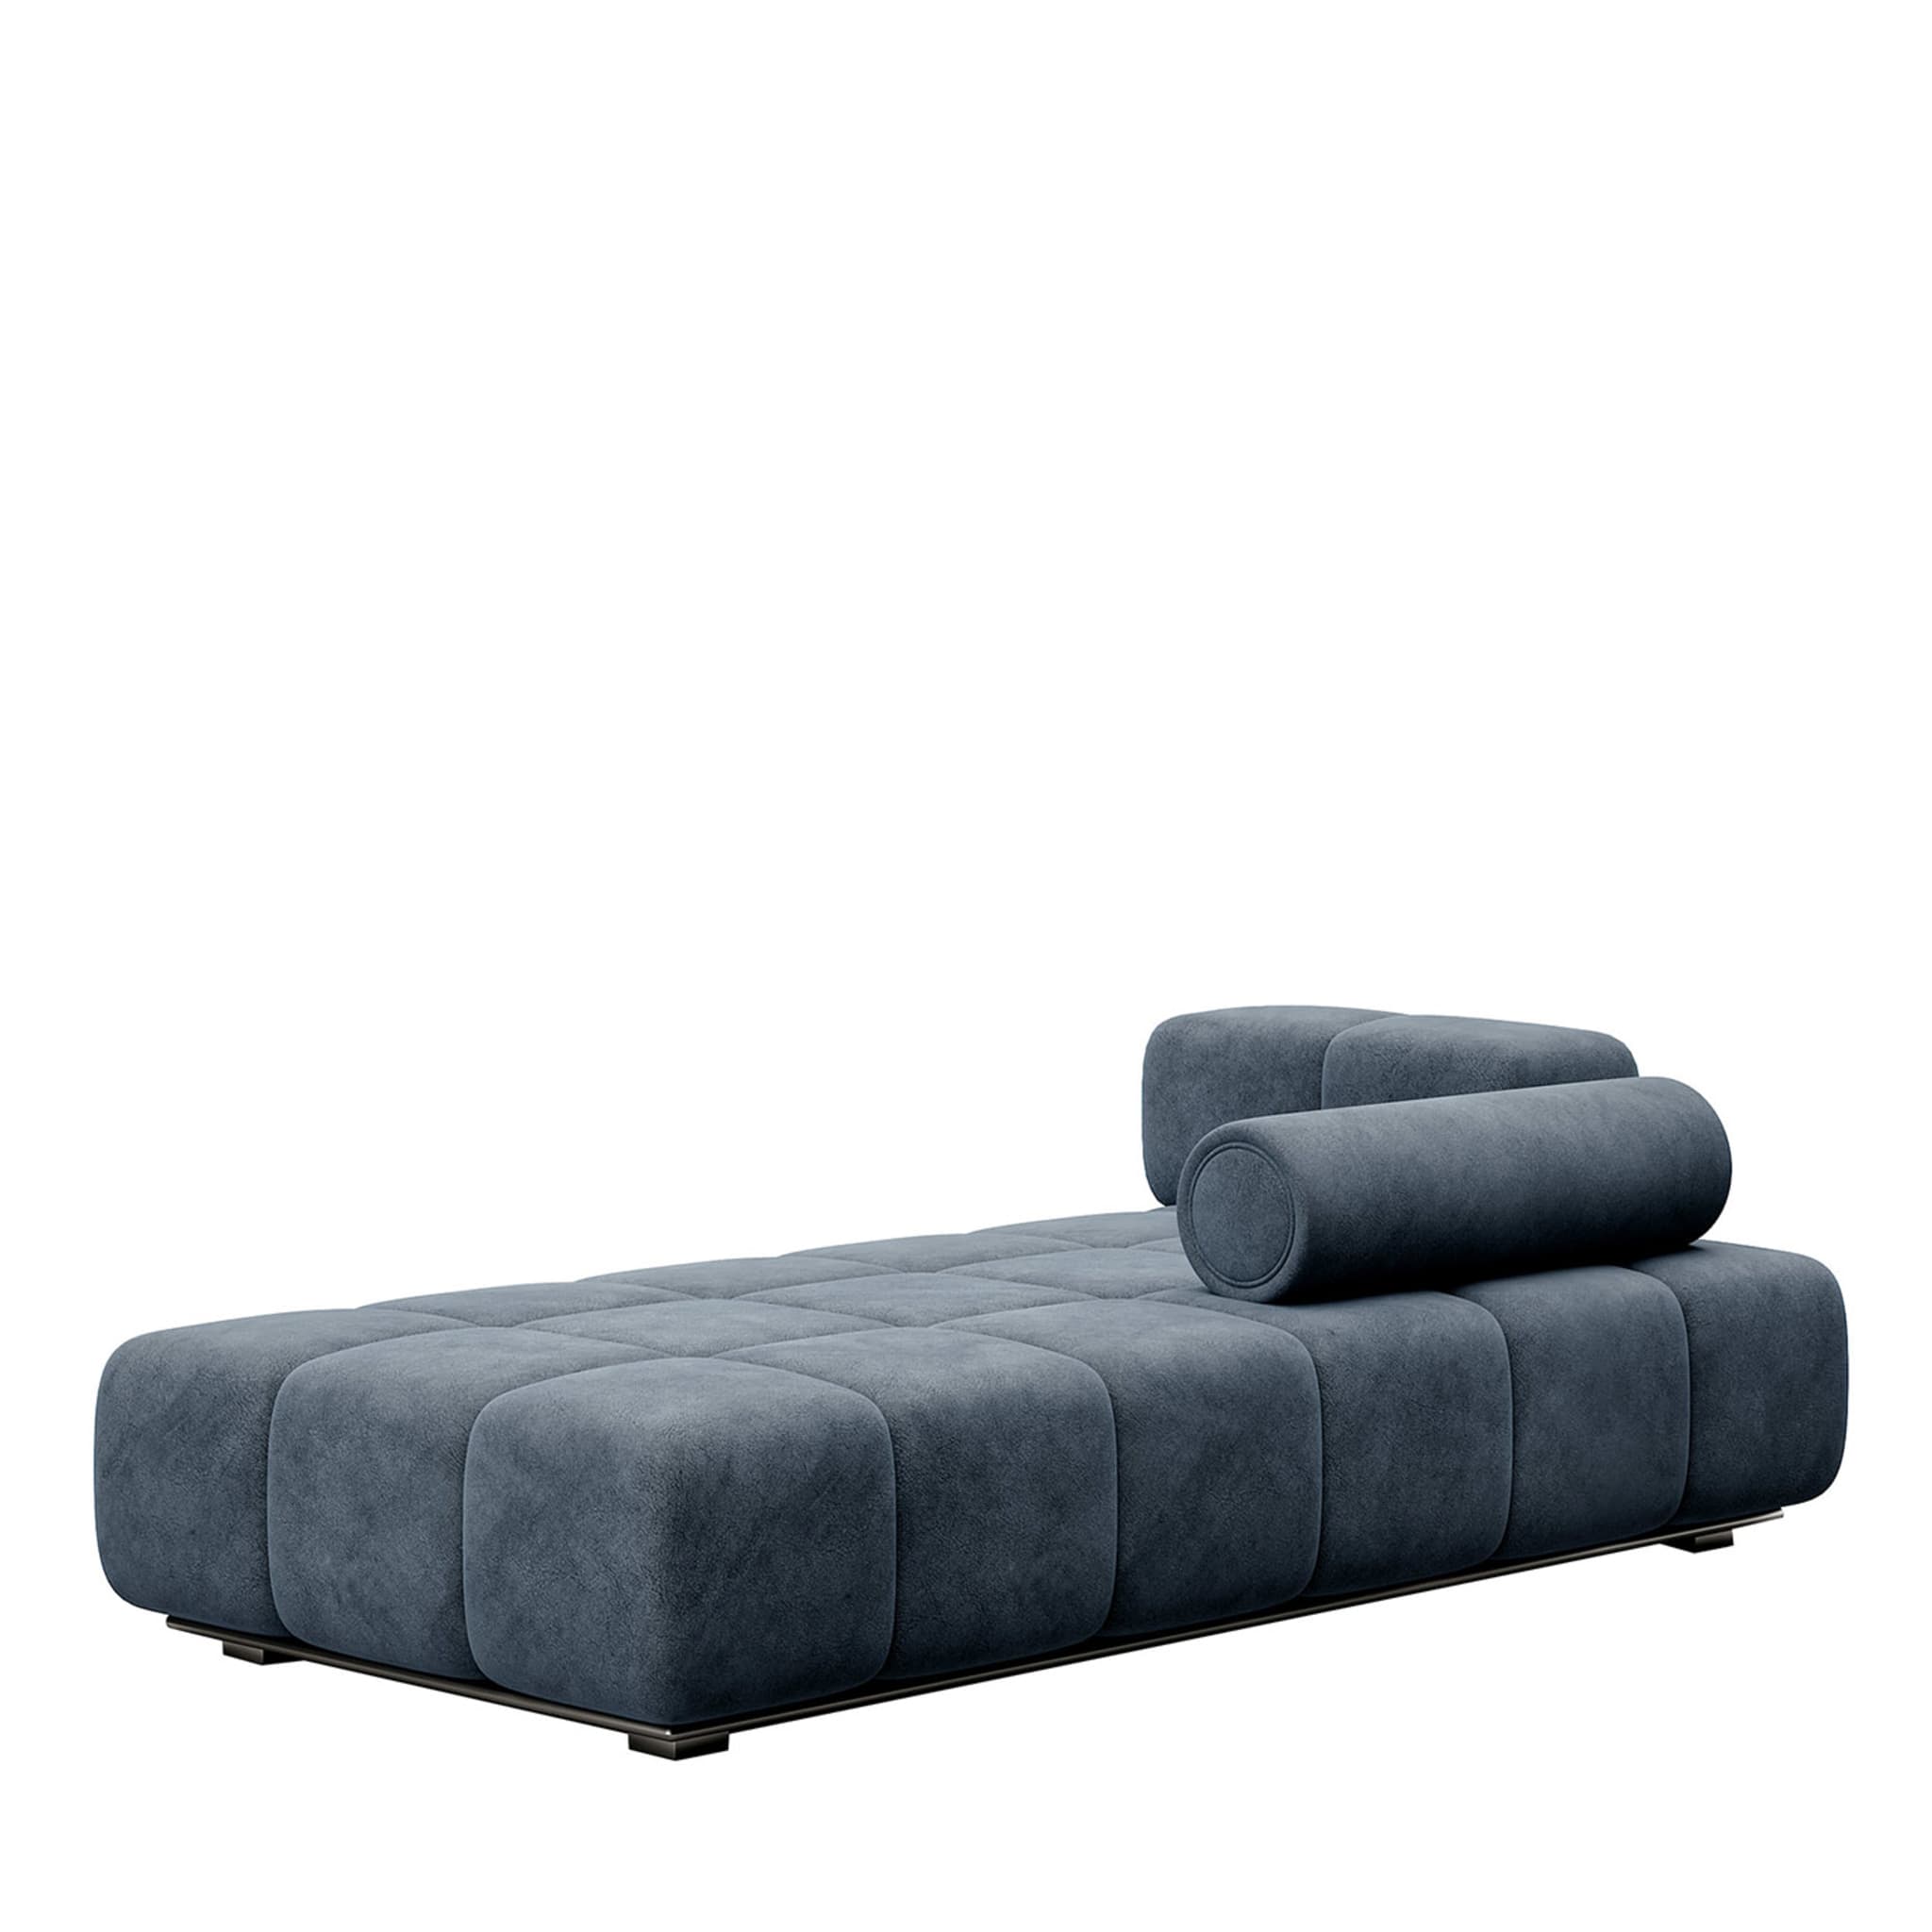 Thomas - Chaise Longue with Backrest and Armrest - Main view